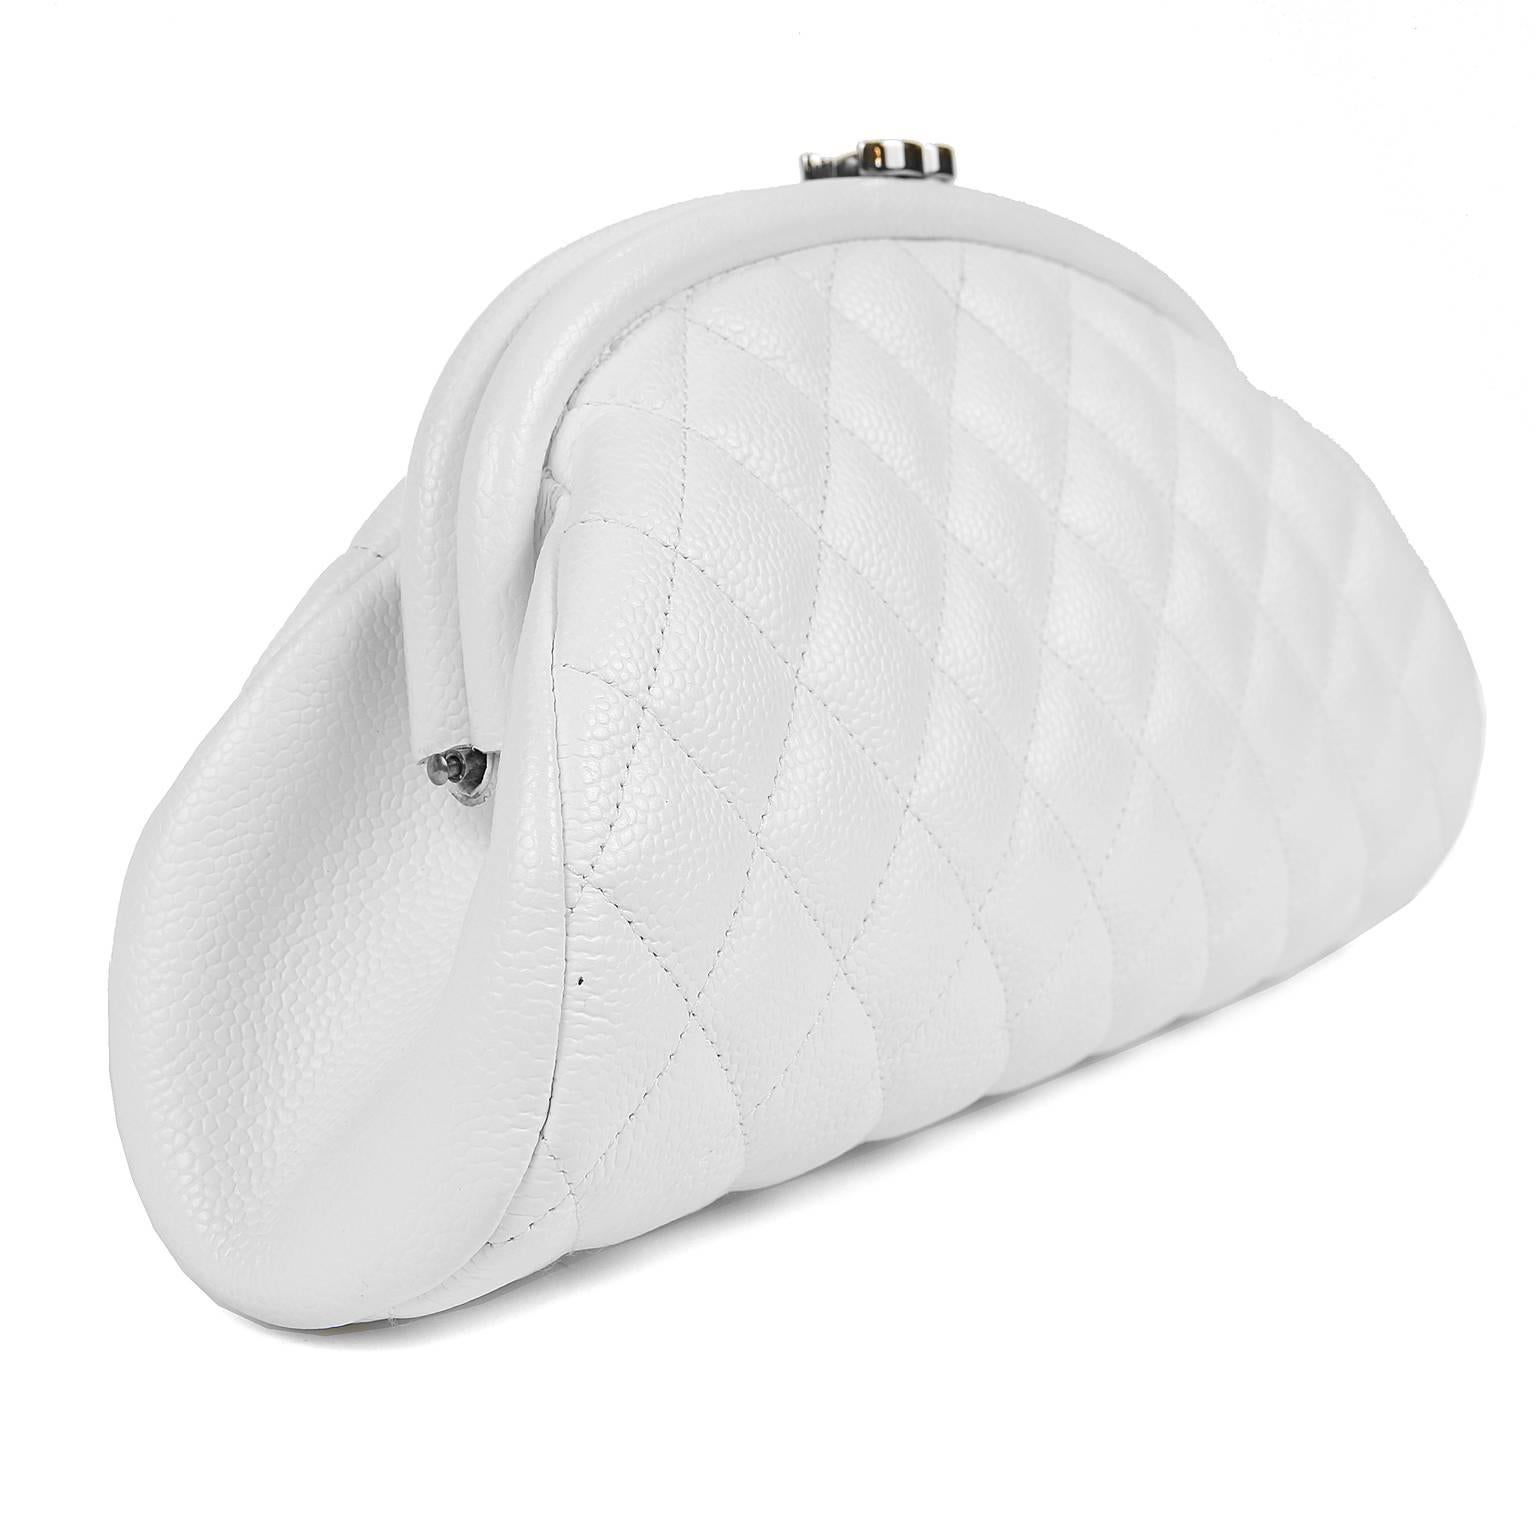 Chanel White Caviar Timeless Clutch- PRISTINE
The simple and elegant design imbues any ensemble with style and can be worn with virtually anything.  
Durable and textured white caviar leather is quilted in signature Chanel diamond stitched pattern. 